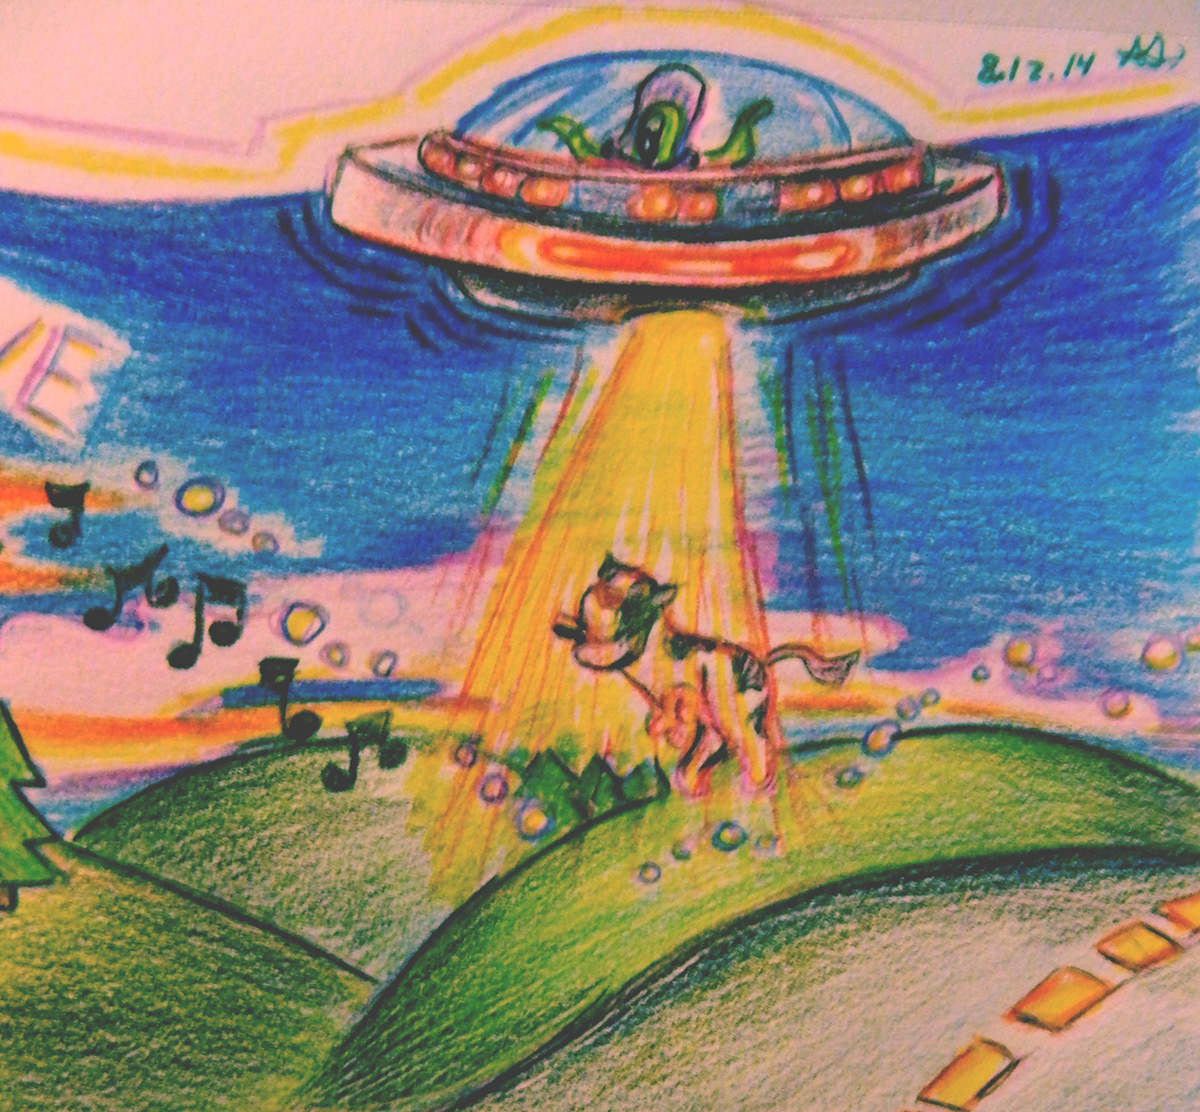 #x-files #agents #aliens #colorpencils #drawing #Iwanttobelieve #ufo #badge #fun-size #forest #class room #showandtell kids